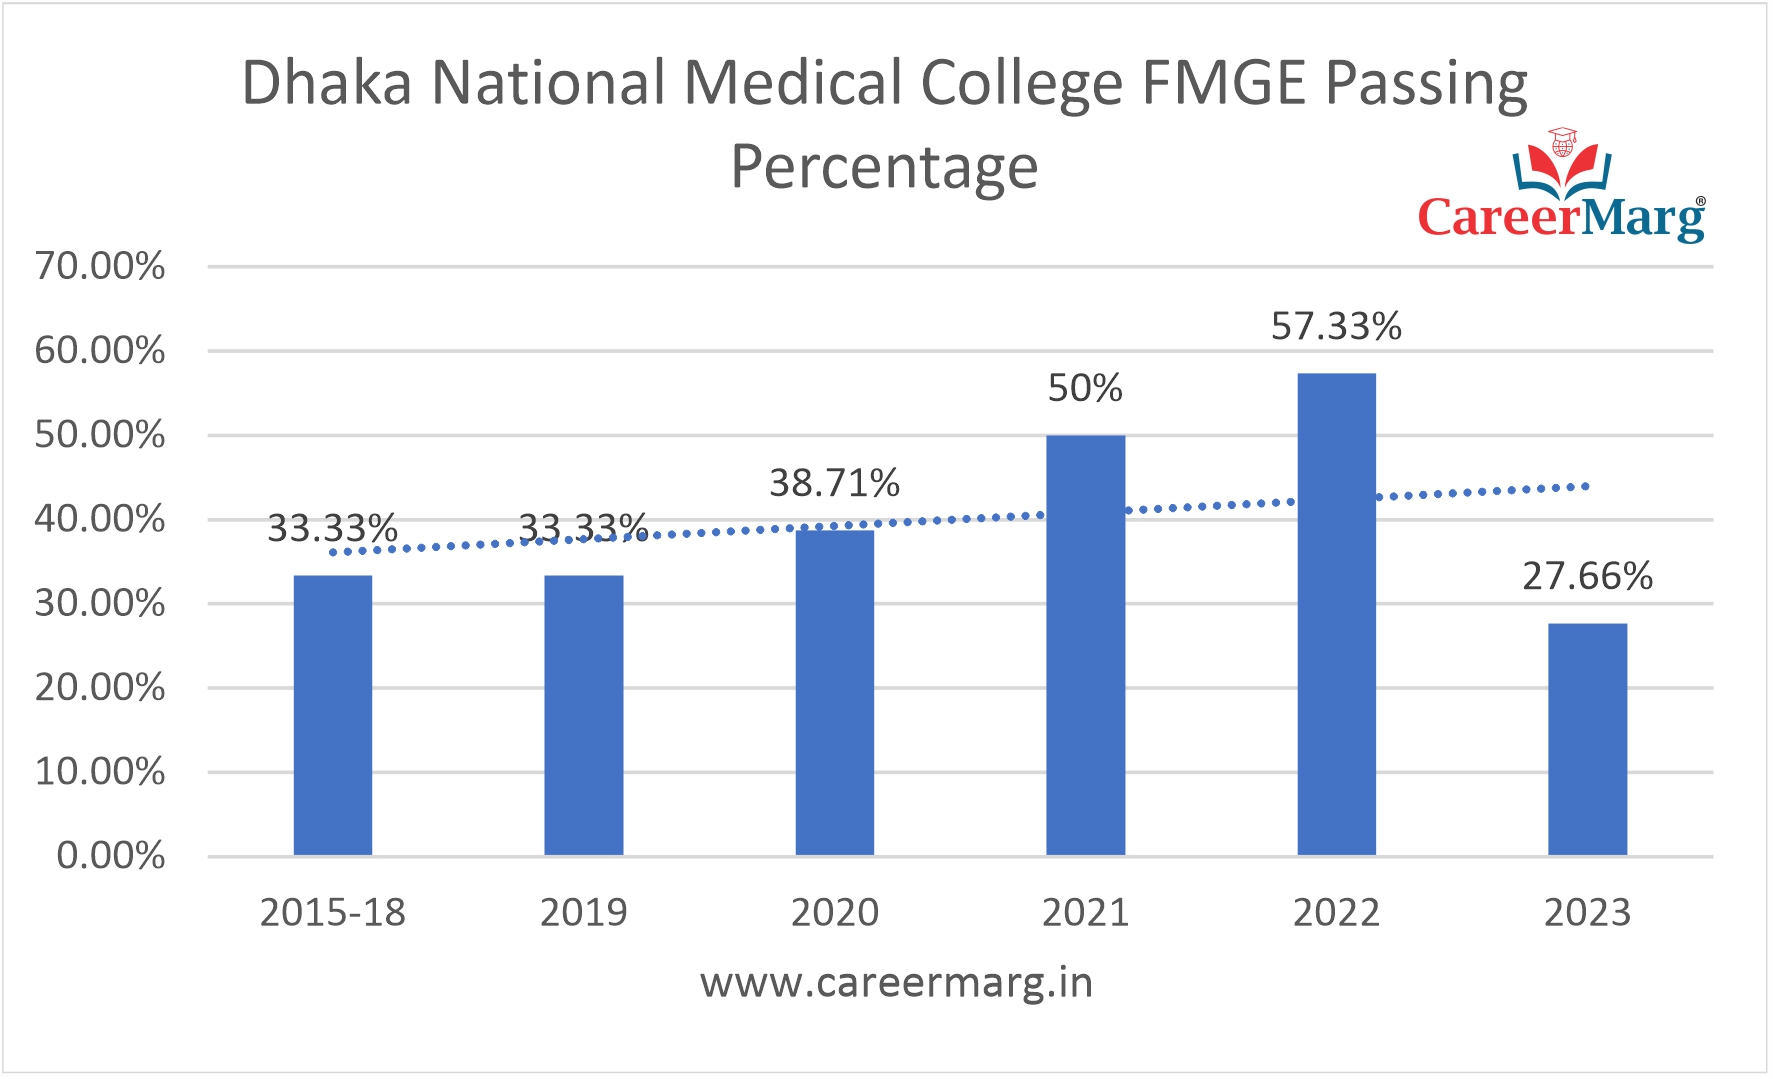 FMGE Passing Rate of Dhaka National Medical College